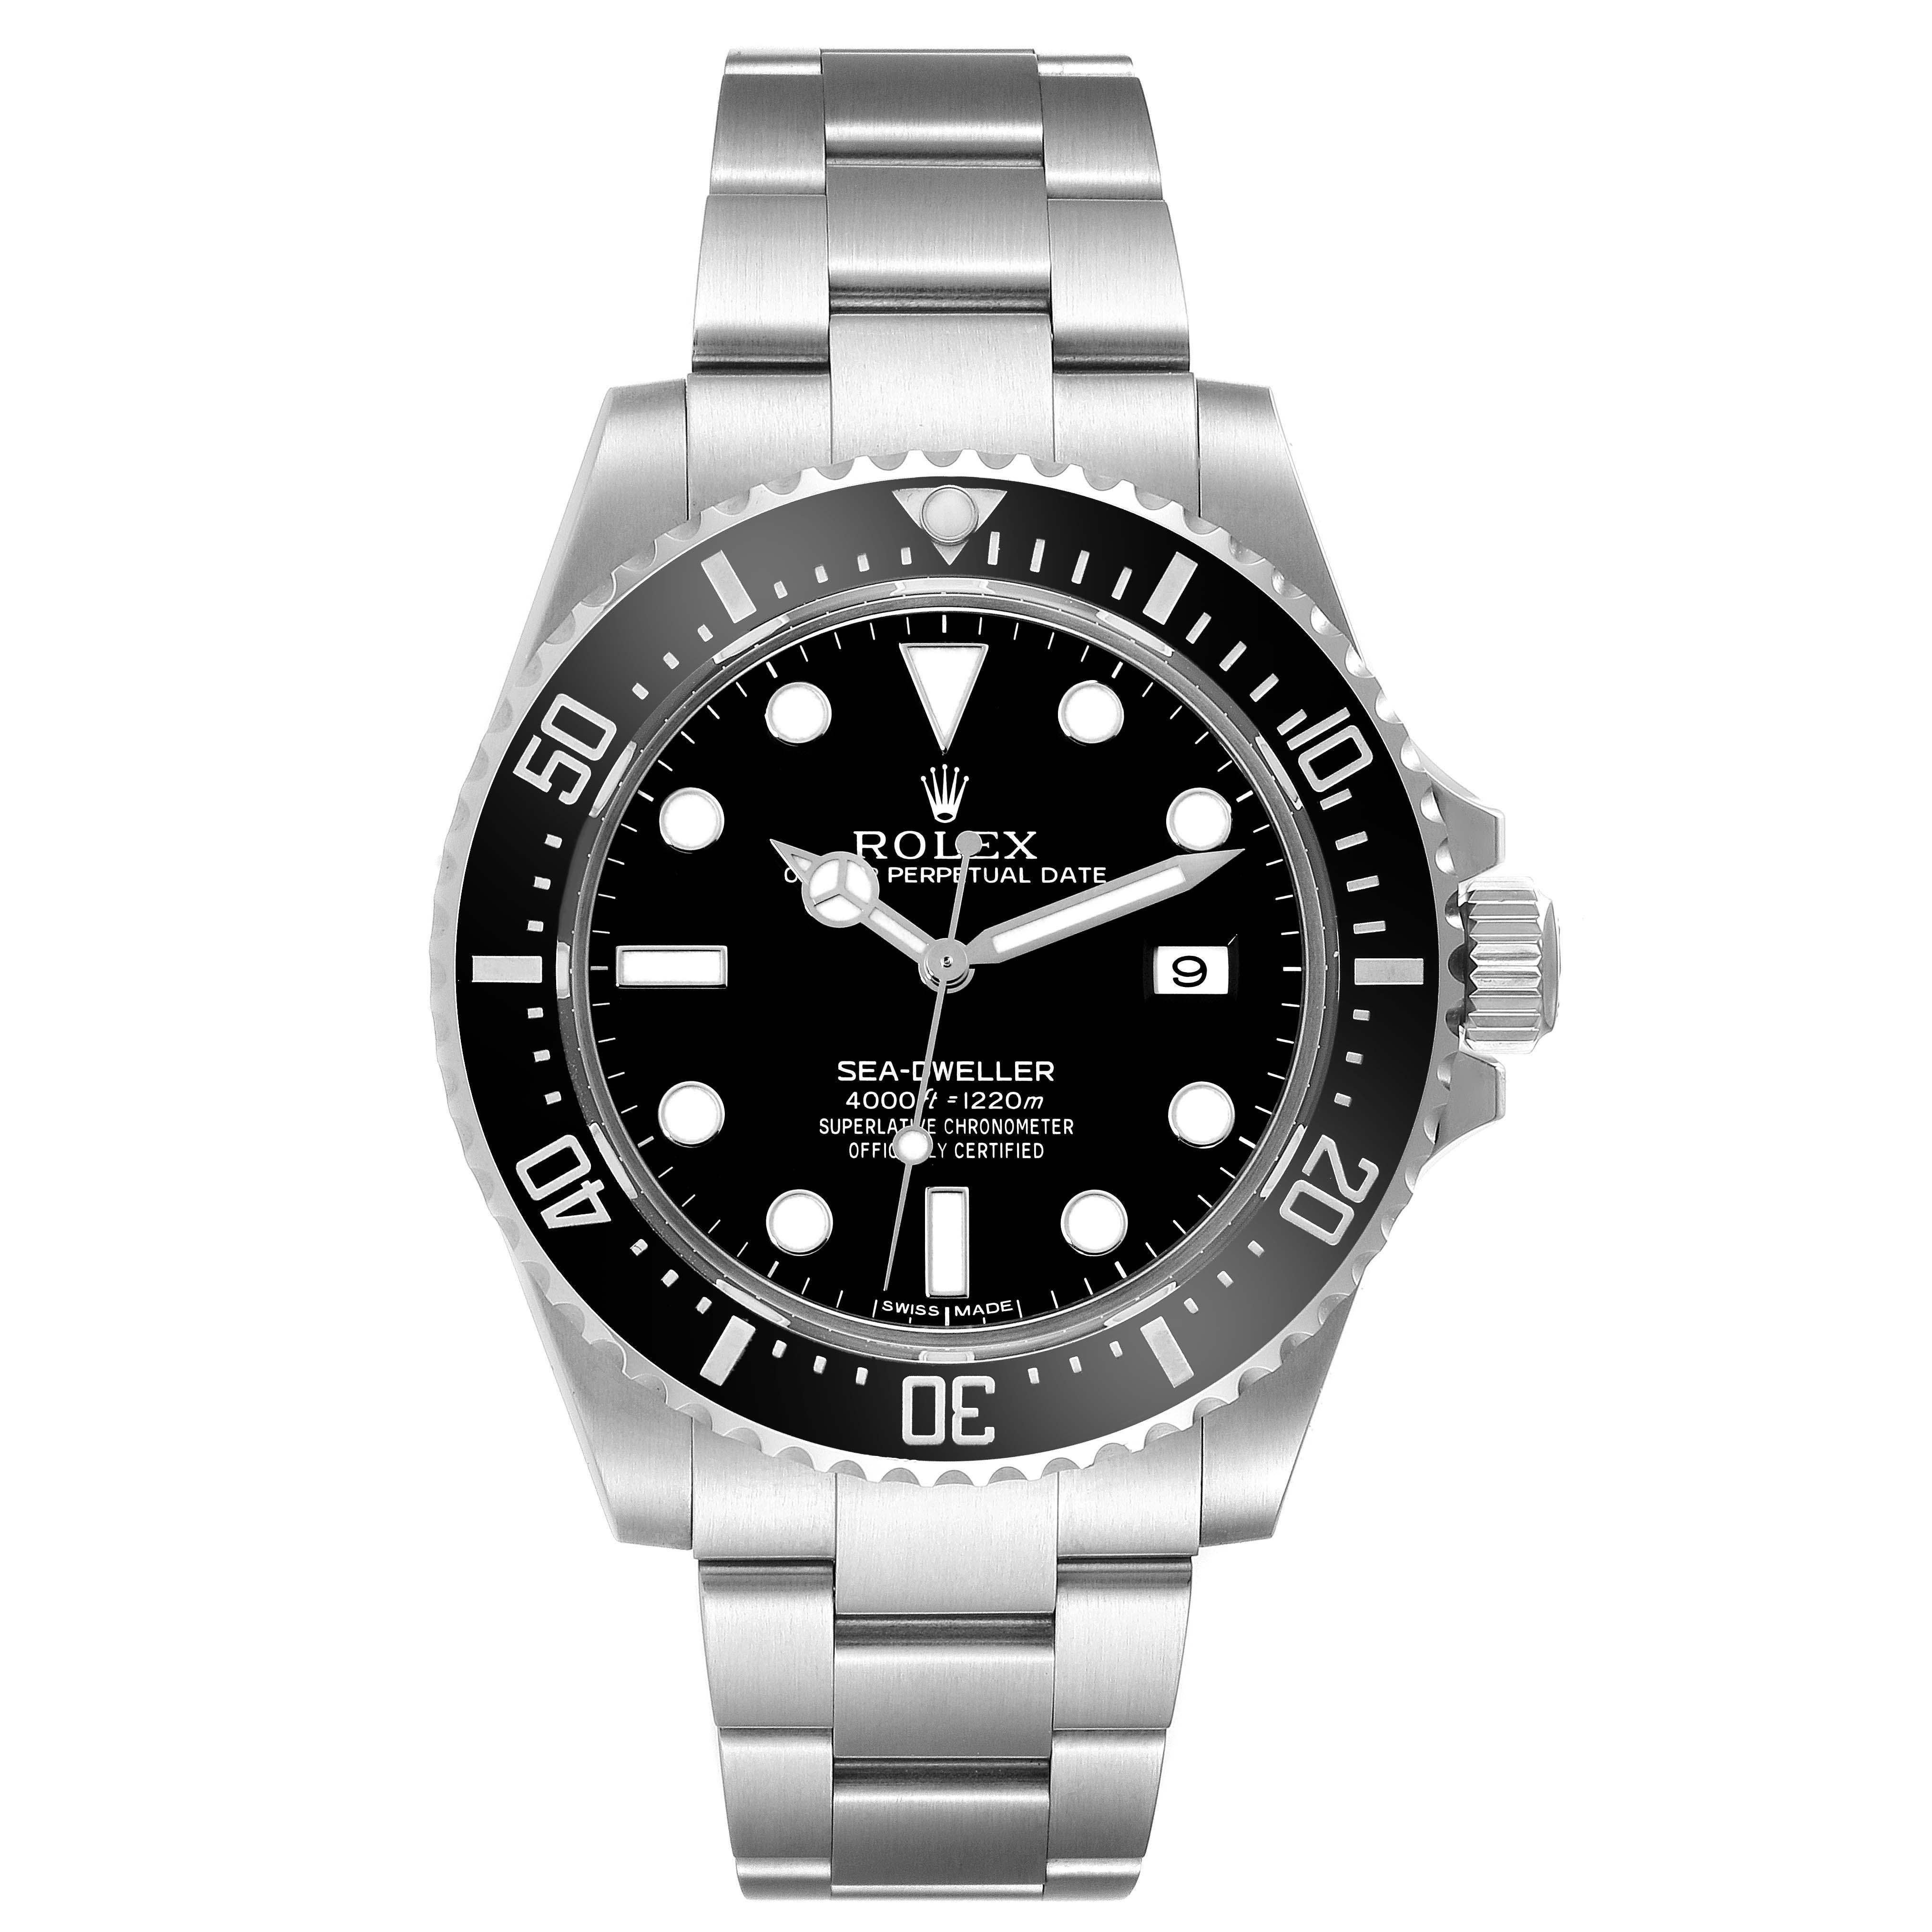 Rolex Seadweller 4000 Automatic Steel Mens Watch 116600 Box Card. Officially certified chronometer self-winding movement. Stainless steel oyster case 40.0 mm in diameter. Rolex logo on a crown. Ceramic unidirectional rotating bezel. Scratch